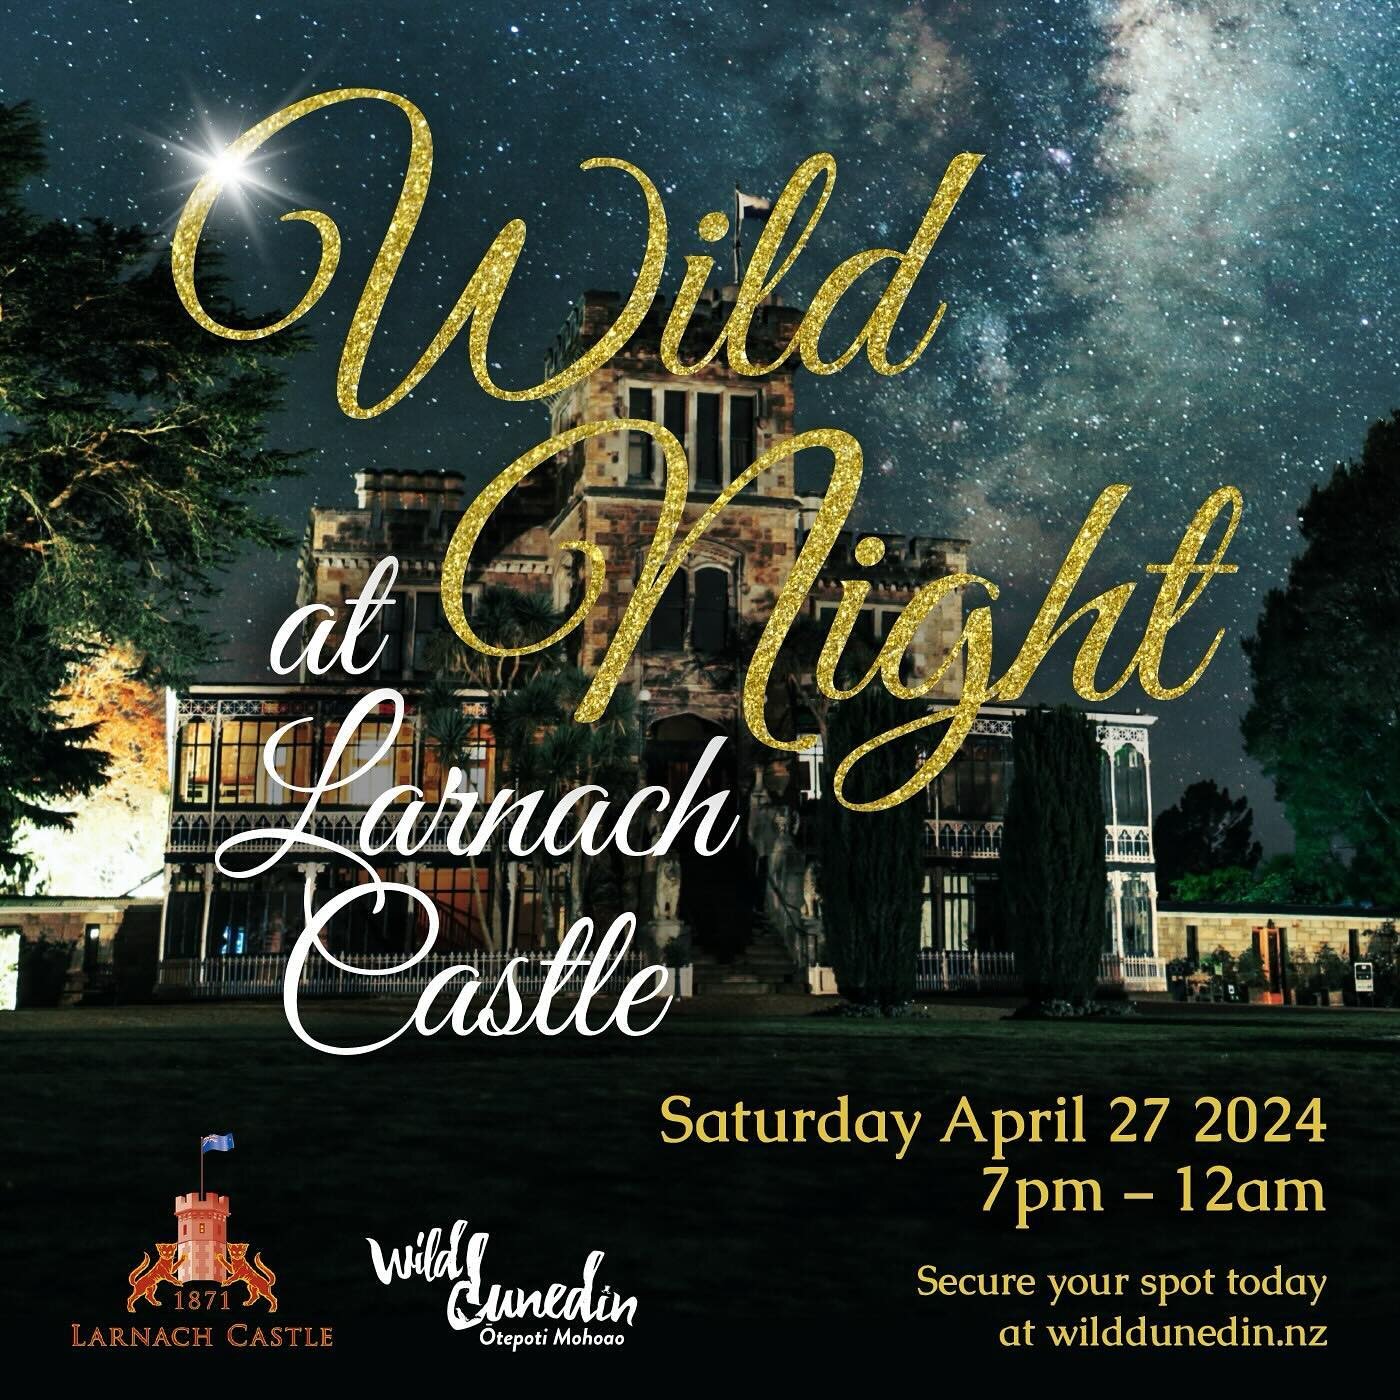 Join us for Larnach Castle&rsquo;s Wild Night Masquerade at the Wild Dunedin Festival on Saturday, April 27, 7pm to midnight. Enjoy live music, wild canap&eacute;s, and drinks in your nature-themed attire. Hop on the 6.30pm Fryatt St bus for a stress